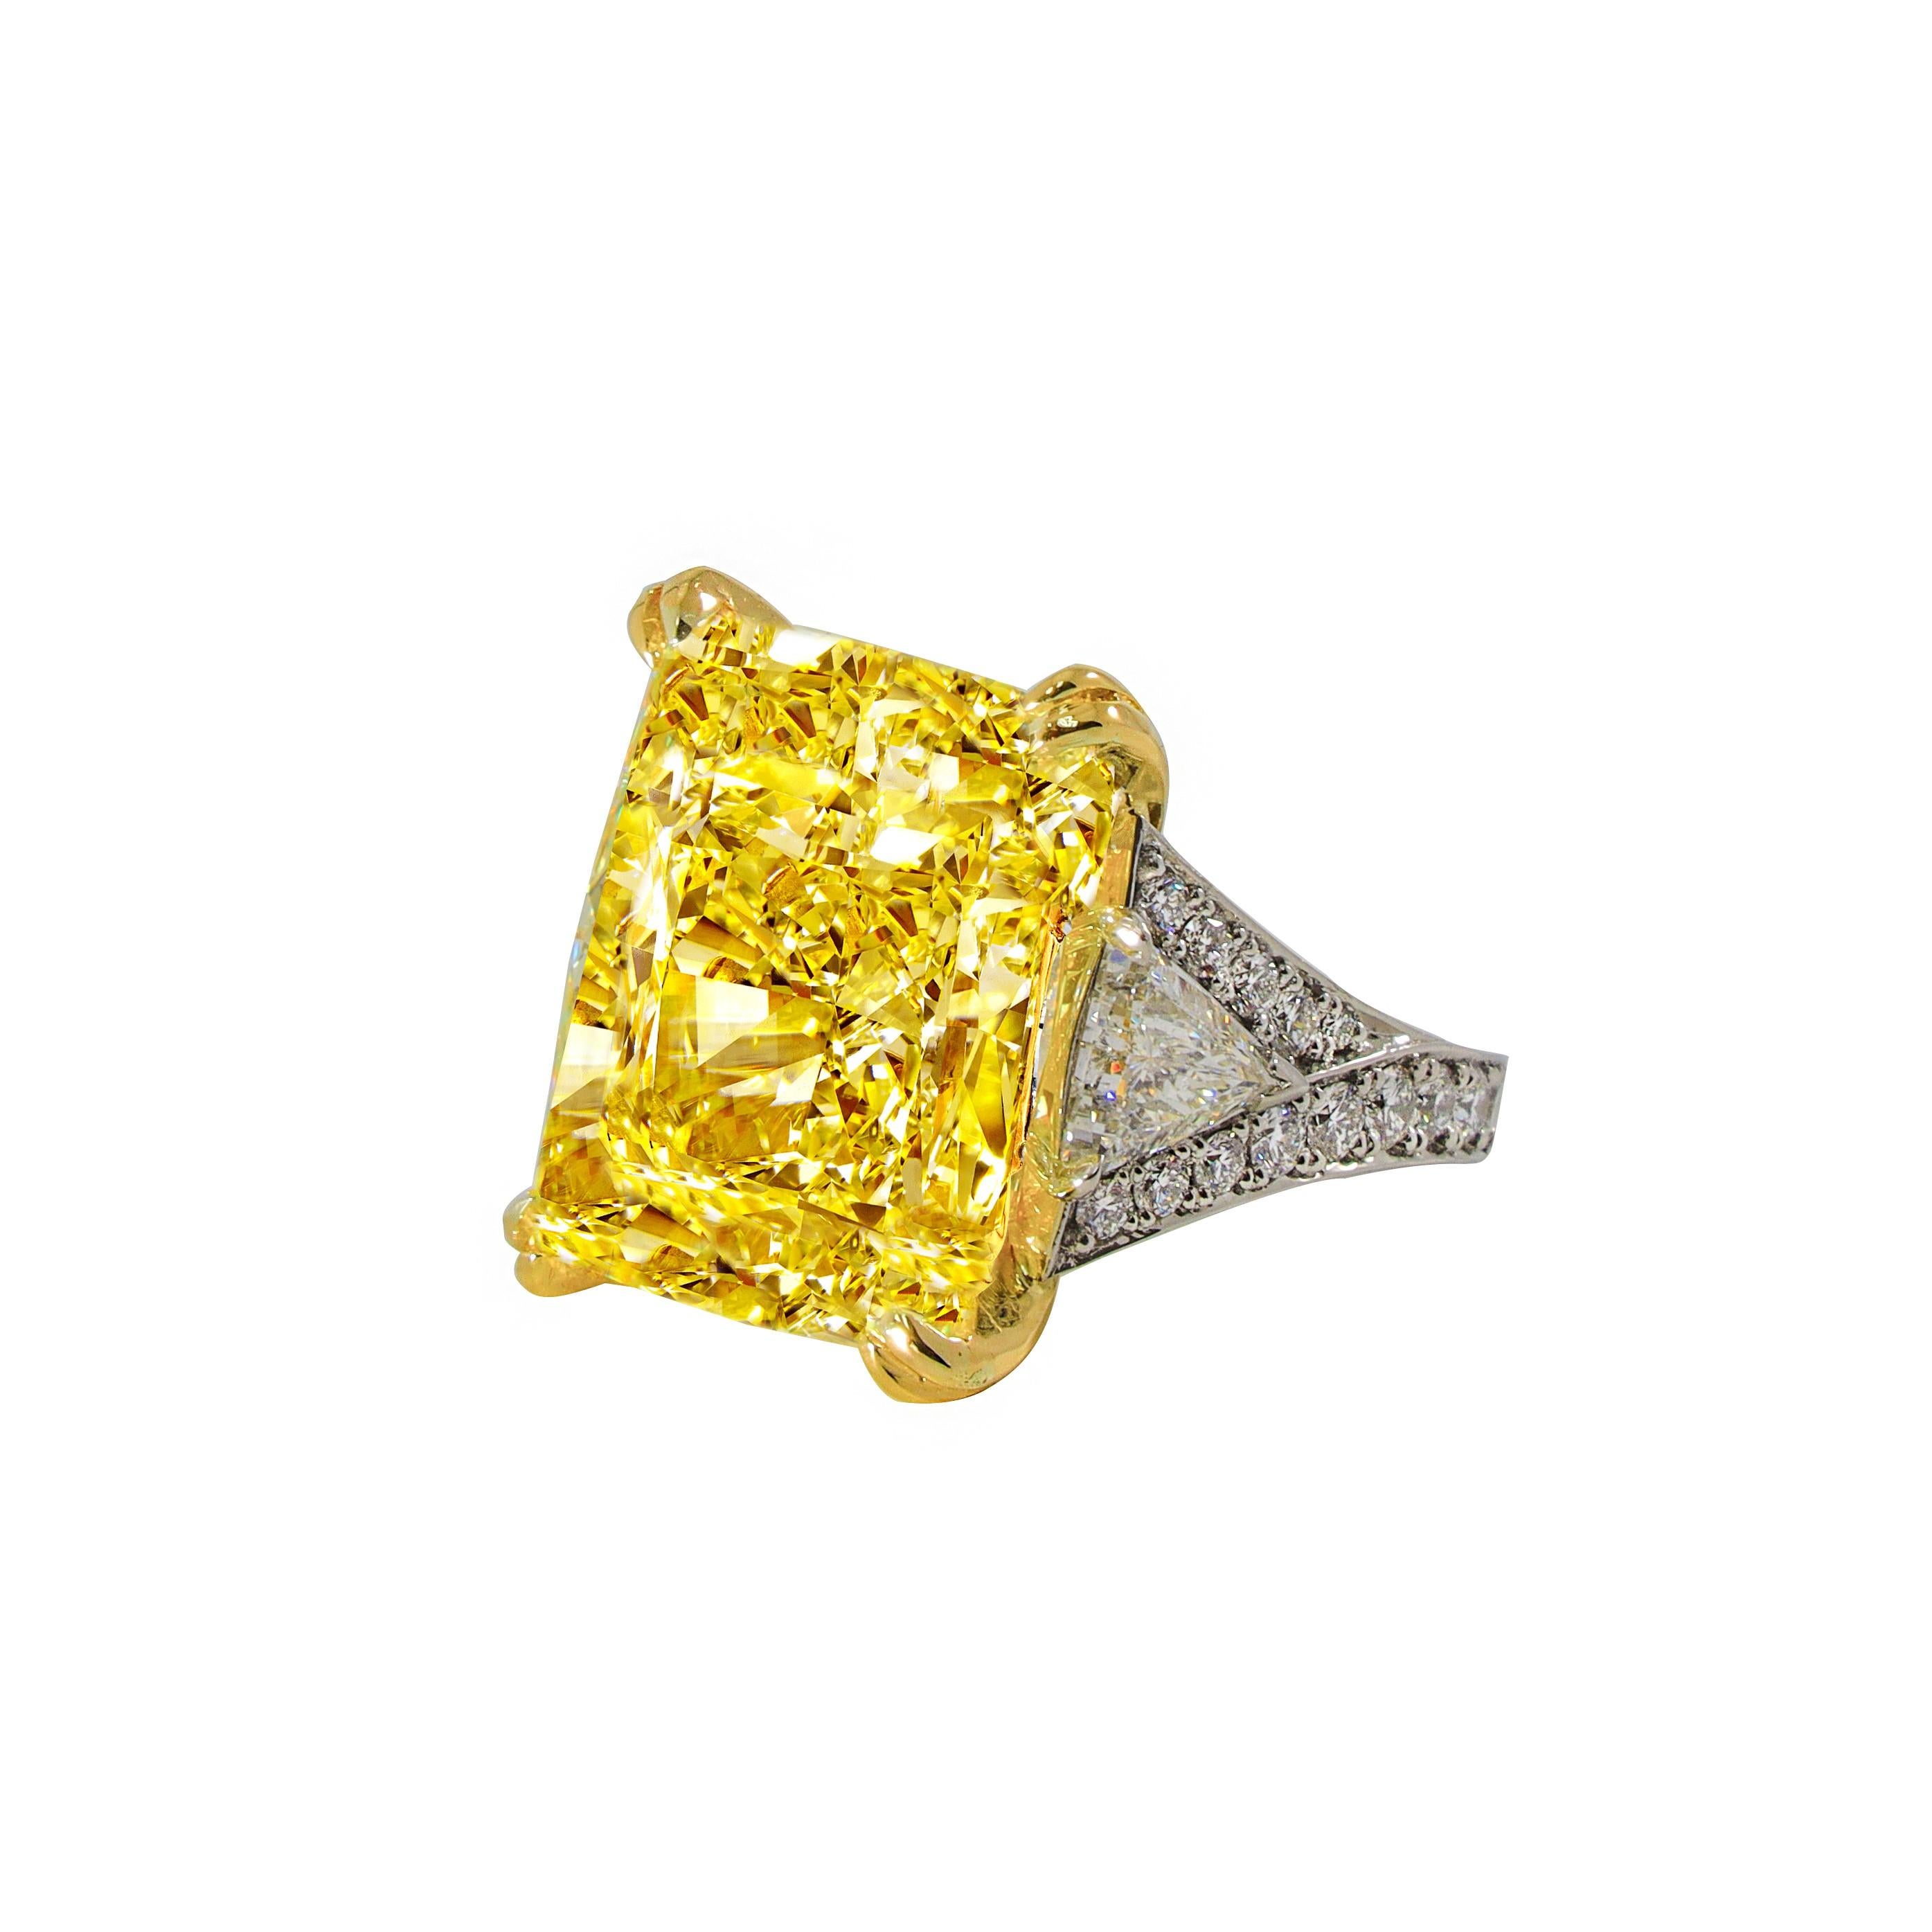 Magnificent radiant cut diamond ring is the Highlight of the Diana M. Jewels. Speechless 34.46 Carats Fancy Intense Yellow Radiant Cut  VS2 in clarity. Certified by GIA set with 3.20 Carats of two impressive trillion diamonds set in Platinum.


